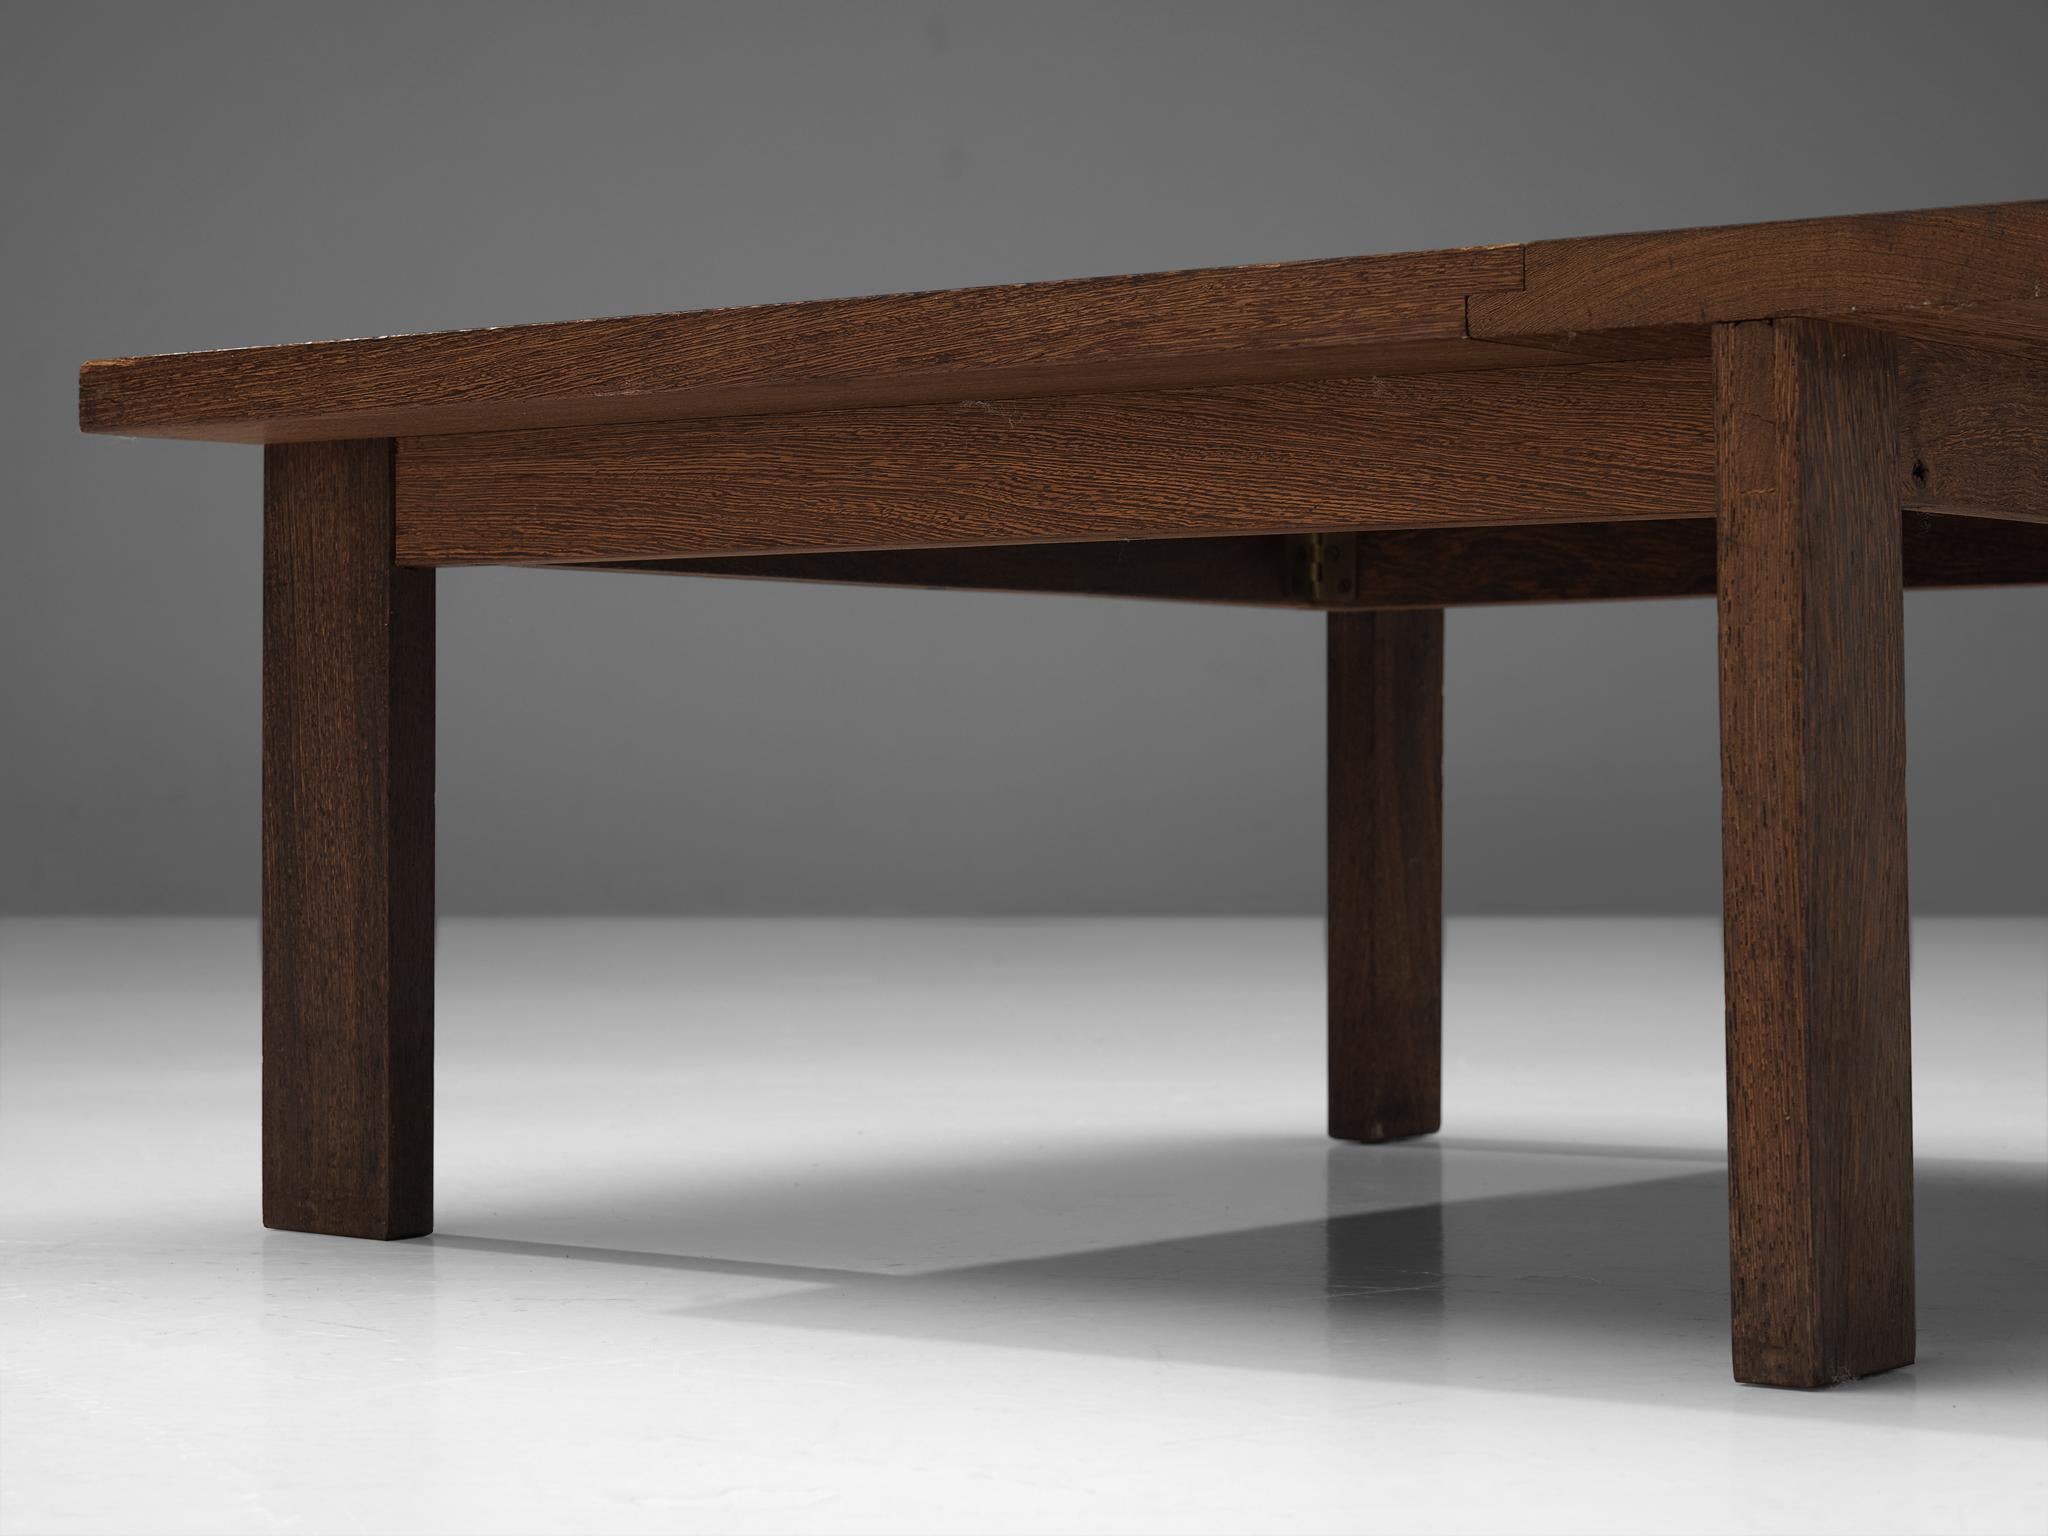 Wenge Danish Coffee Table in Wengé and Slate